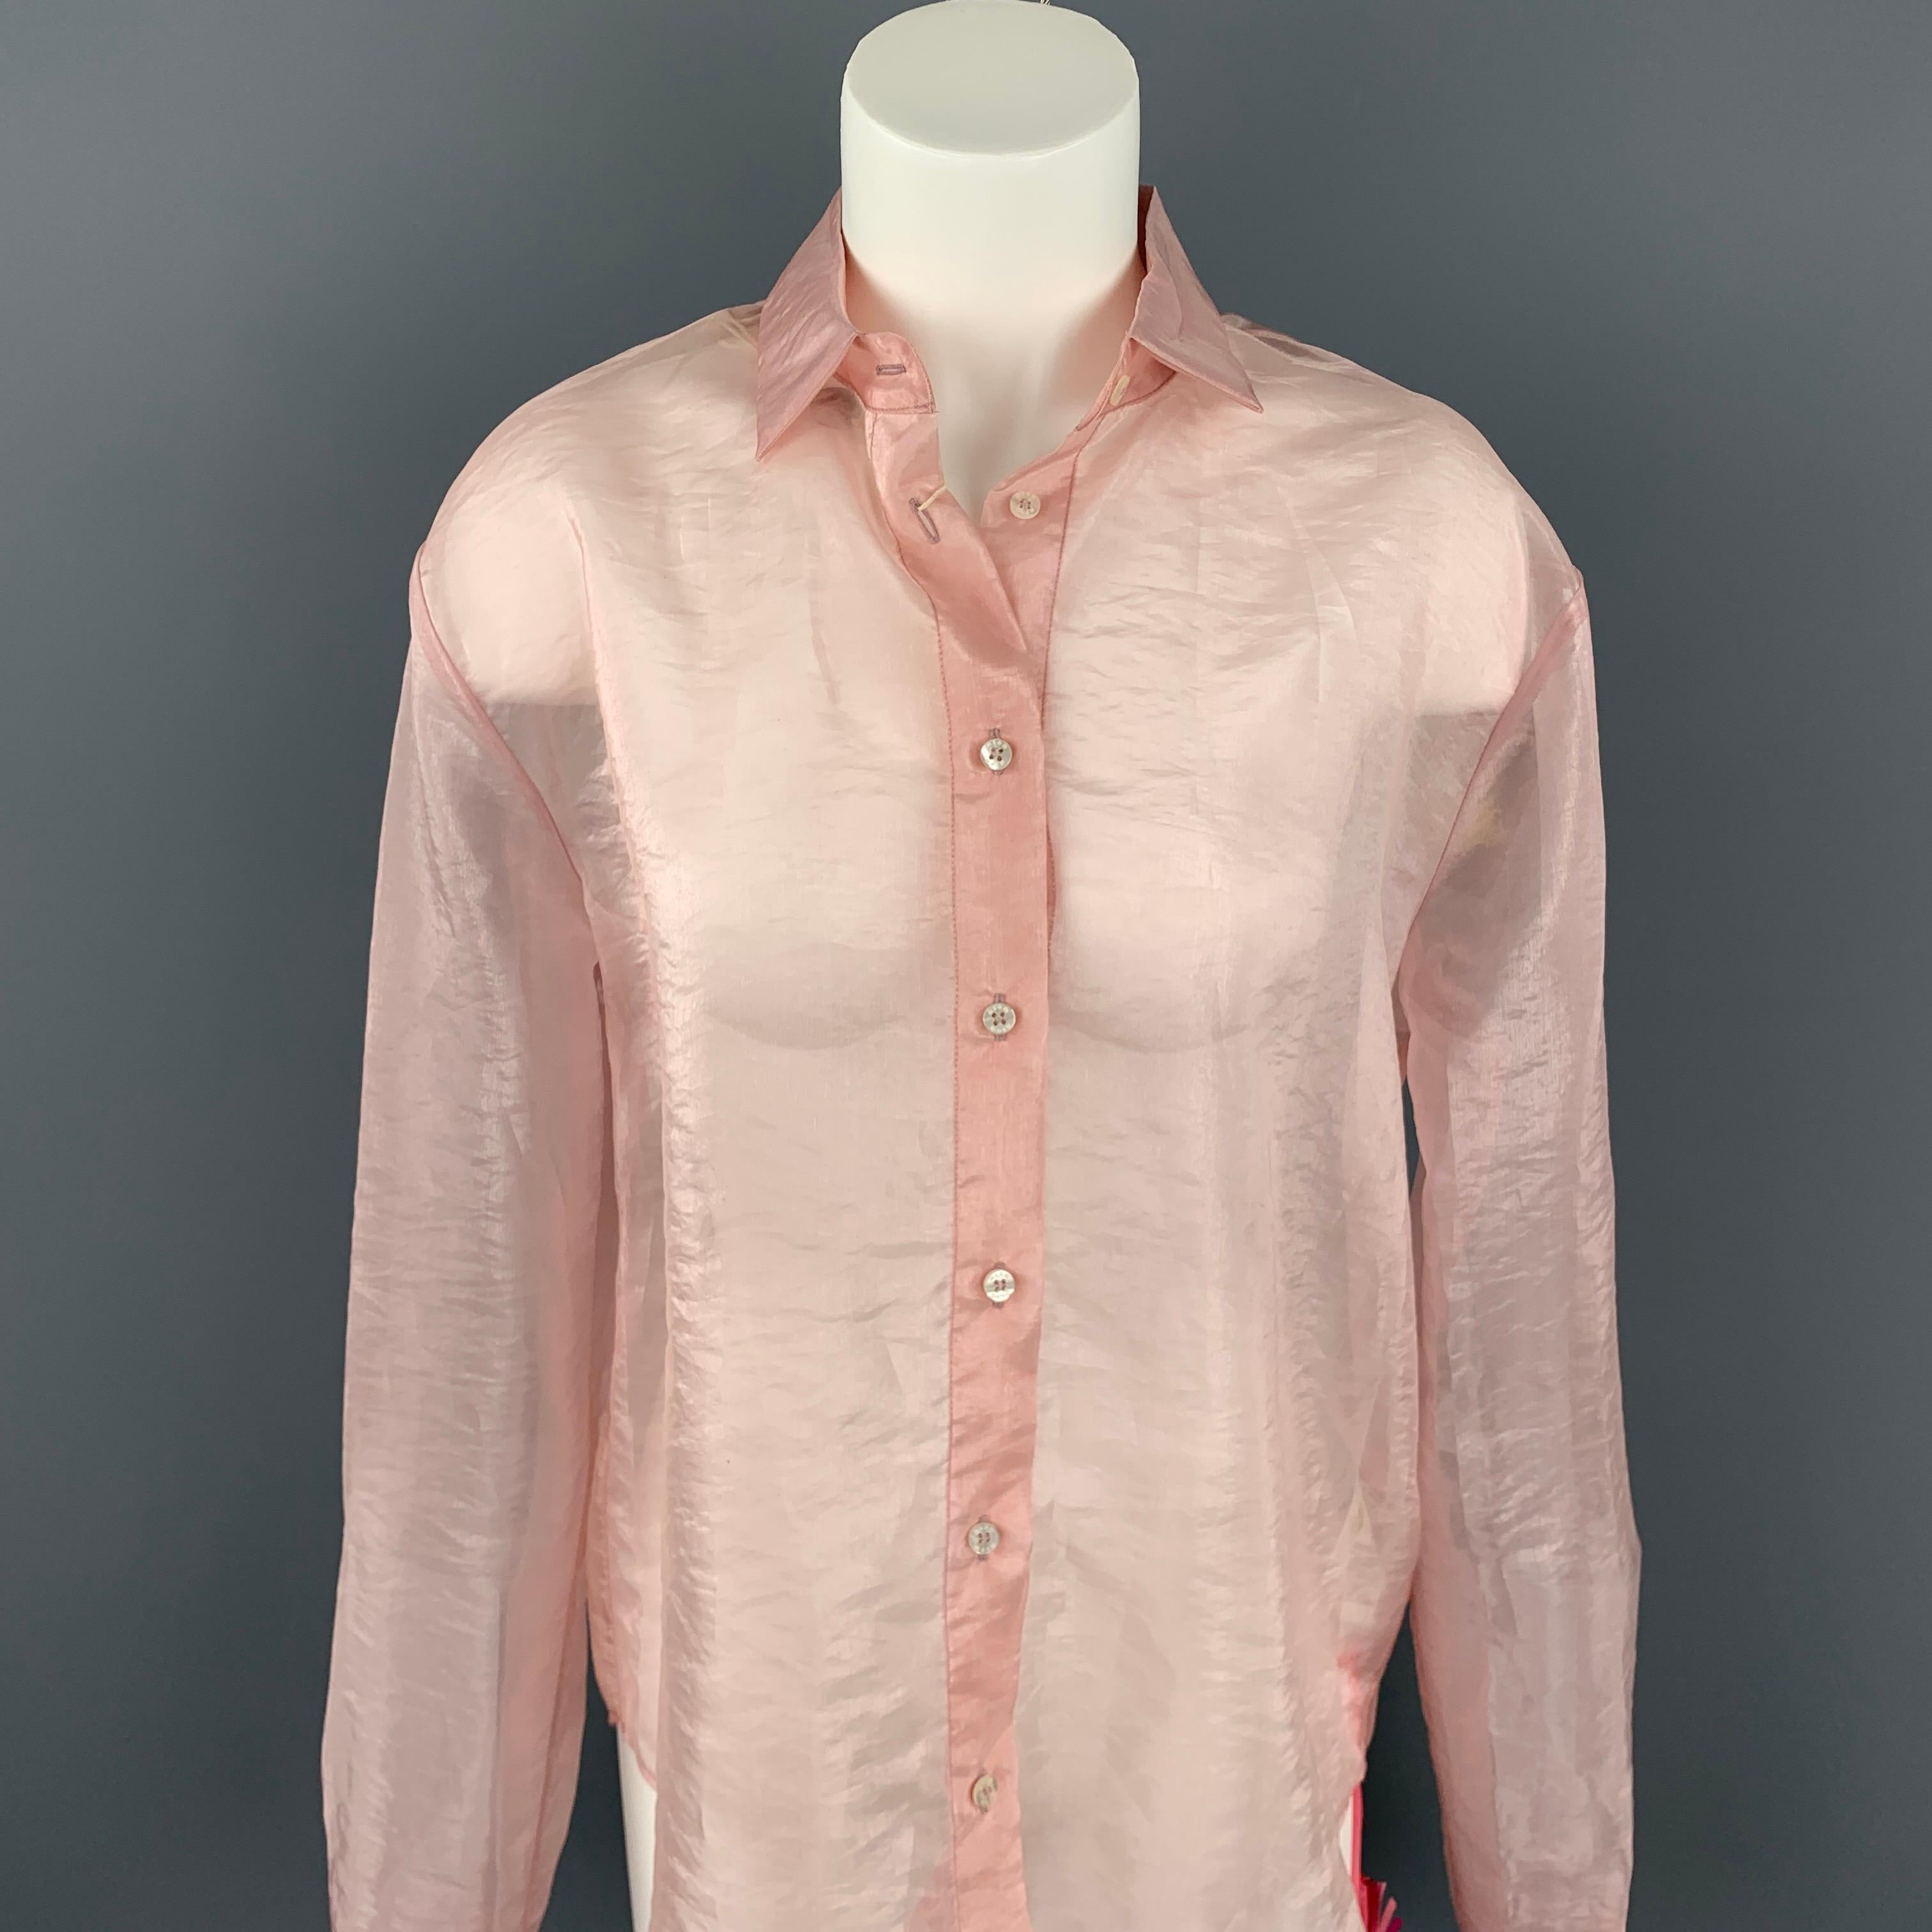 MSGM blouse comes in a rose see through polyamide featuring a button up style, loose fit, and a spread collar. Made in Italy.

New With Tags.
Marked: 40

Measurements:

Shoulder: 17.5 in.
Bust: 44 in.
Sleeve: 26.5 in.
Length: 28 in. 